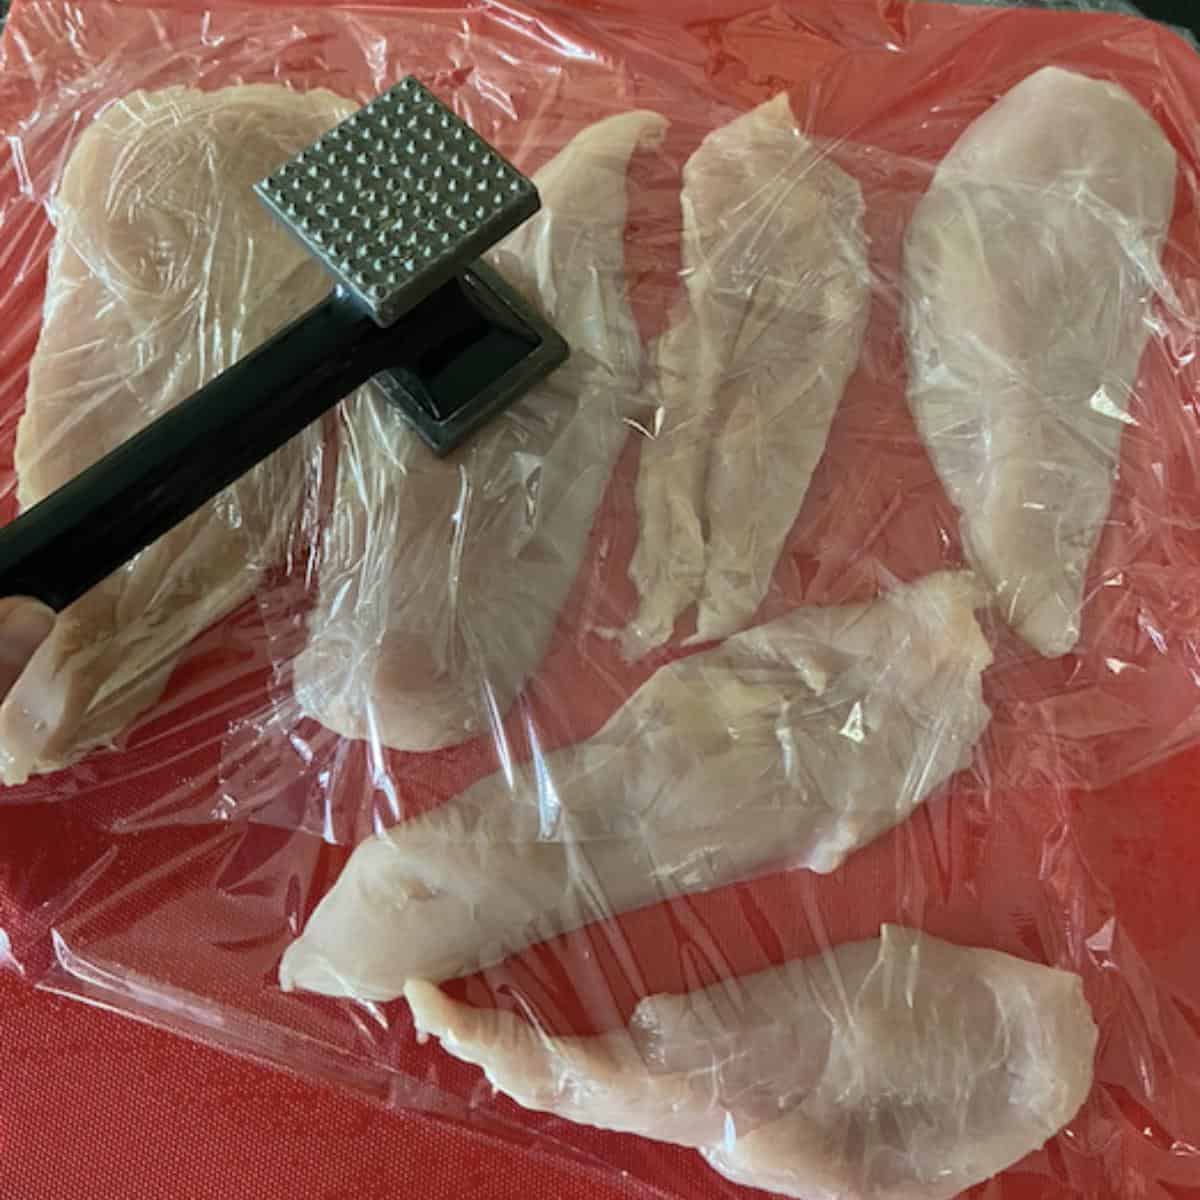 Mallet pounding chicken breast into thin breasts on cutting board.